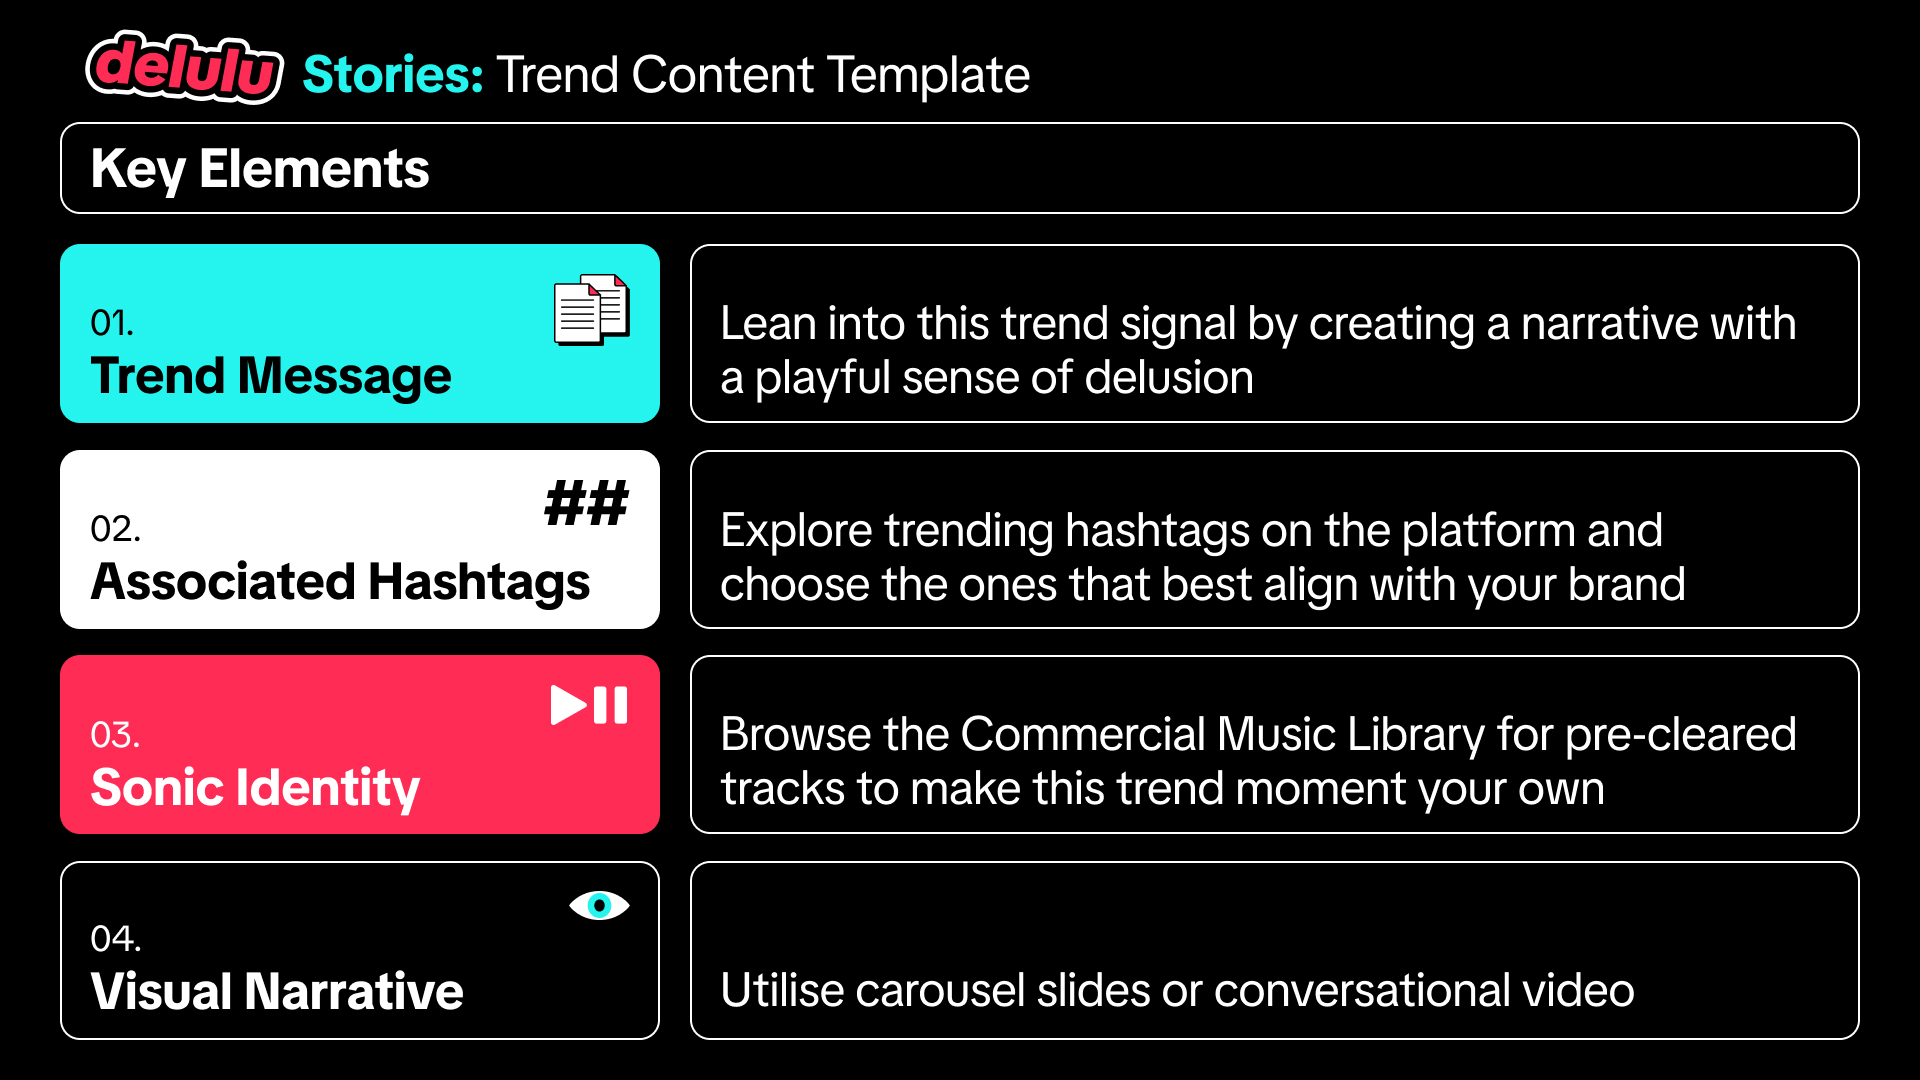 TikTok Trends Digest Content Template: Make It Your Own